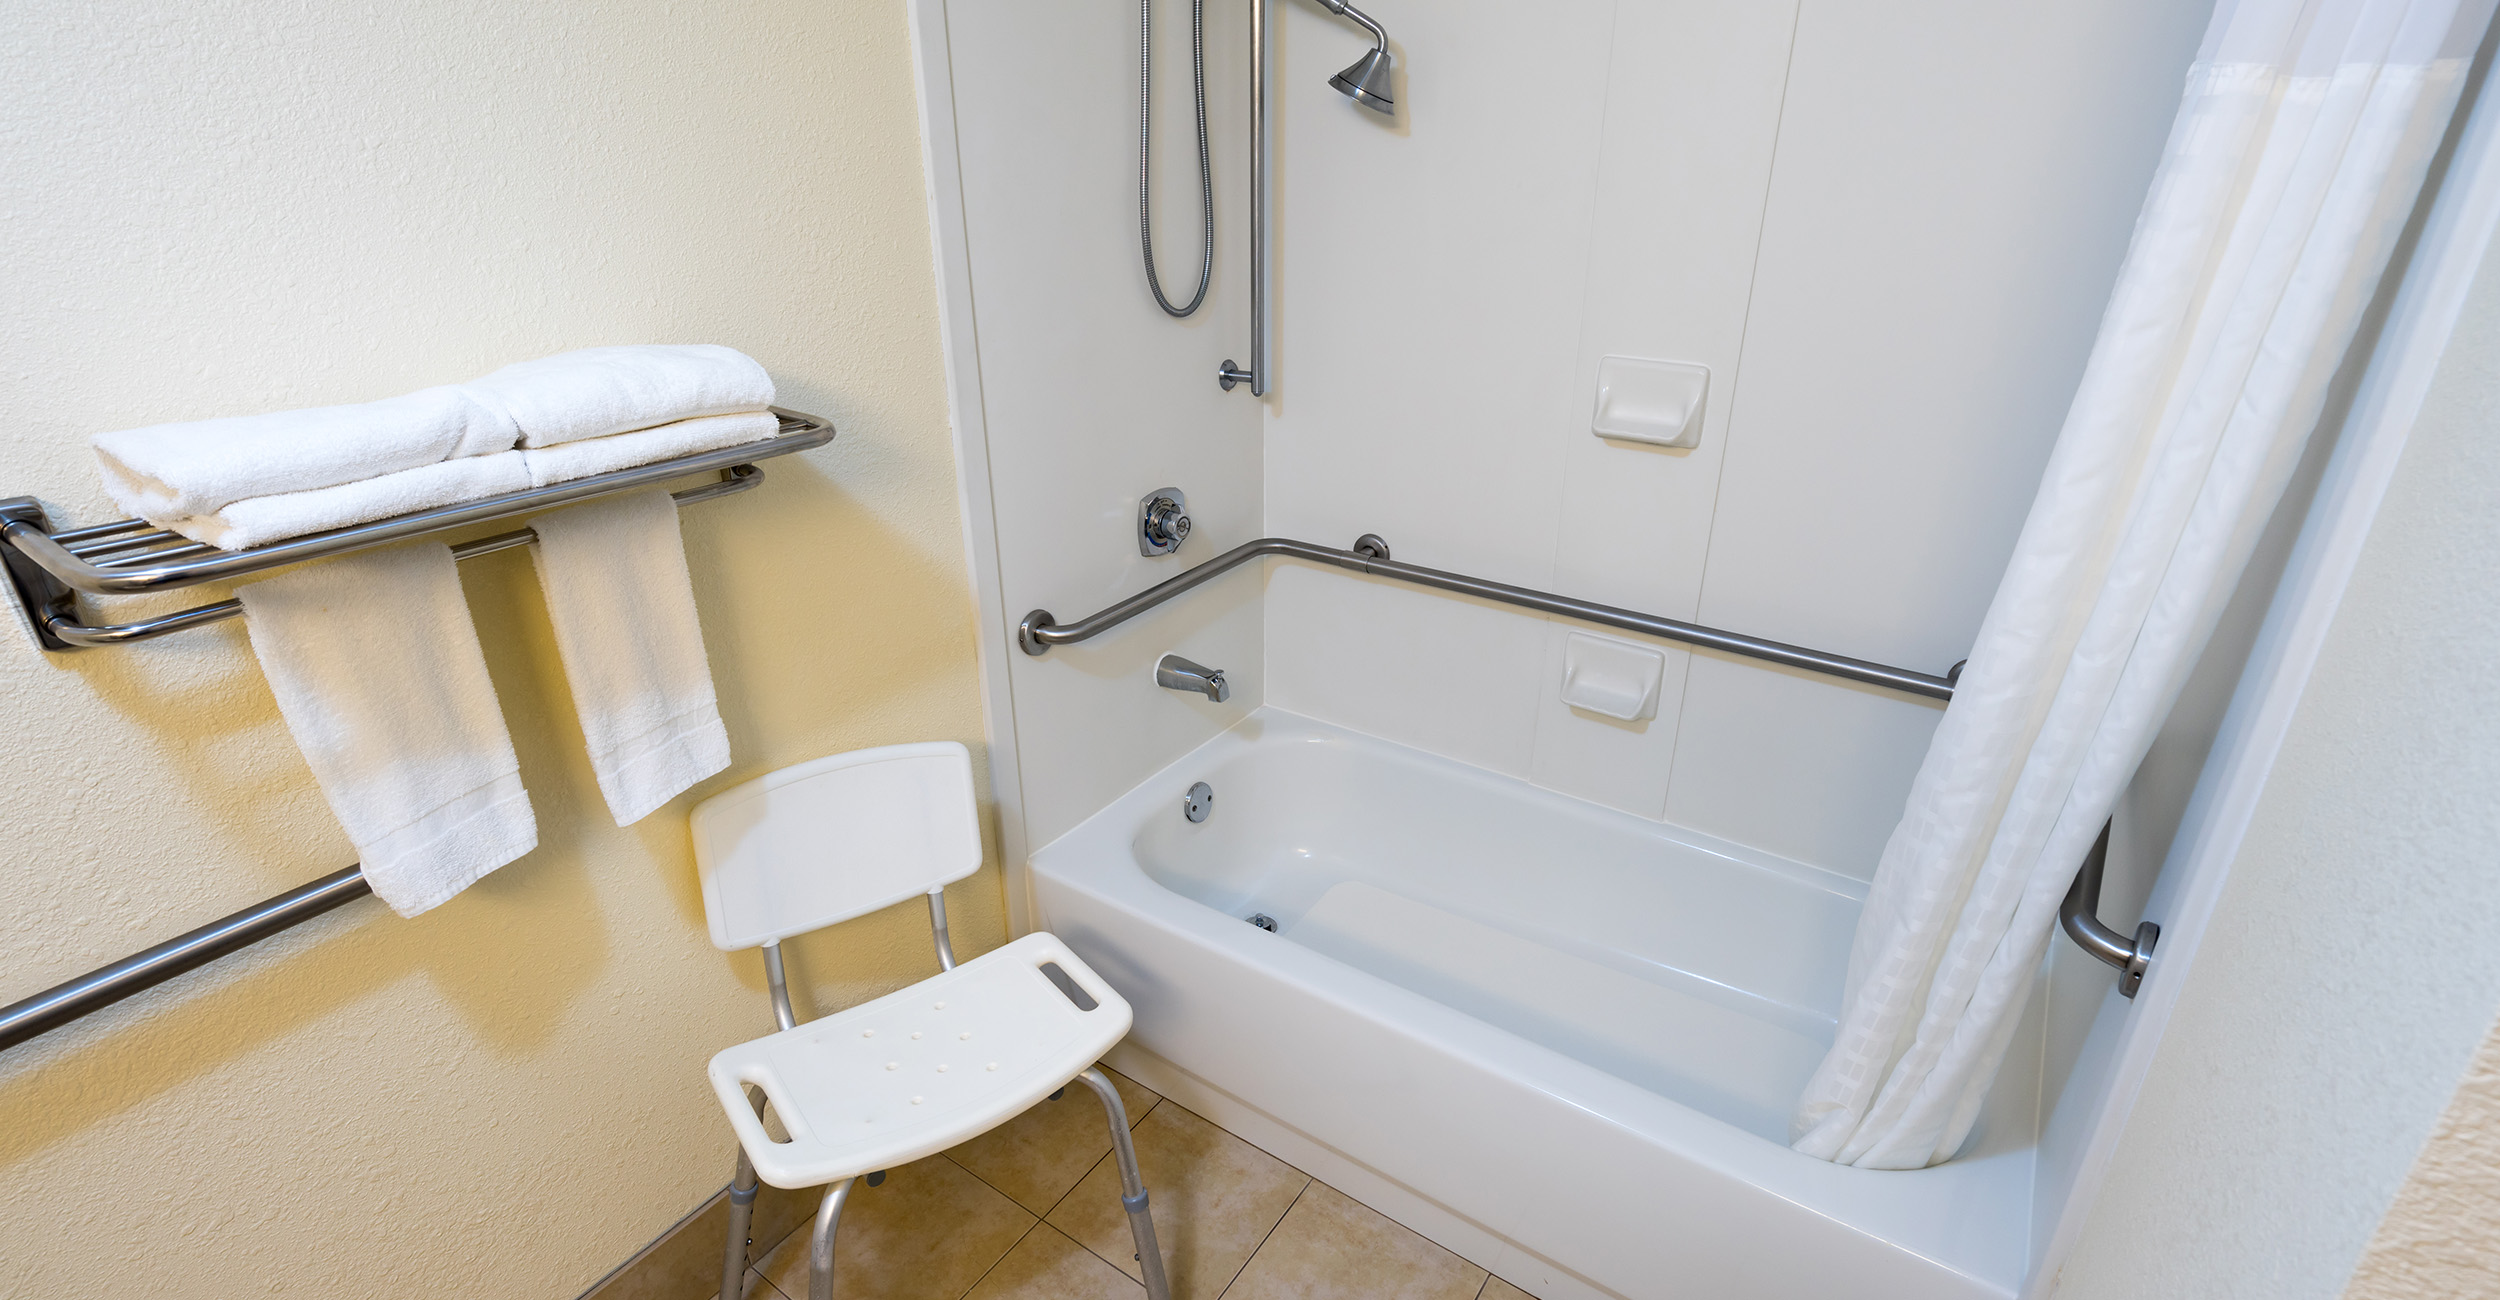 Bathroom with a shower seat and grab bars.